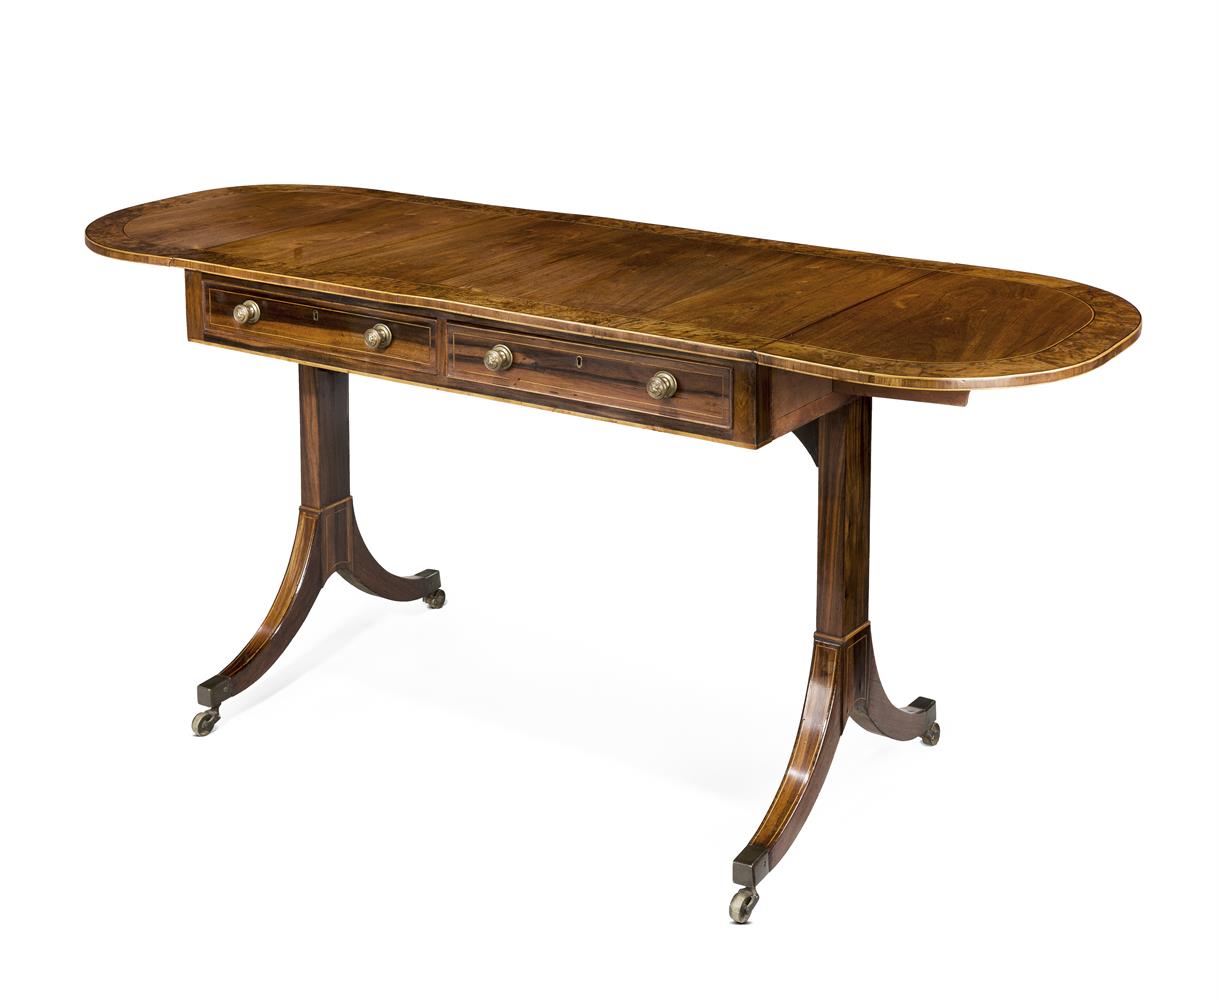 Y AN UNUSUAL REGENCY PADOUK AND BURR YEW CROSSBANDED SOFA TABLE, CIRCA 1815